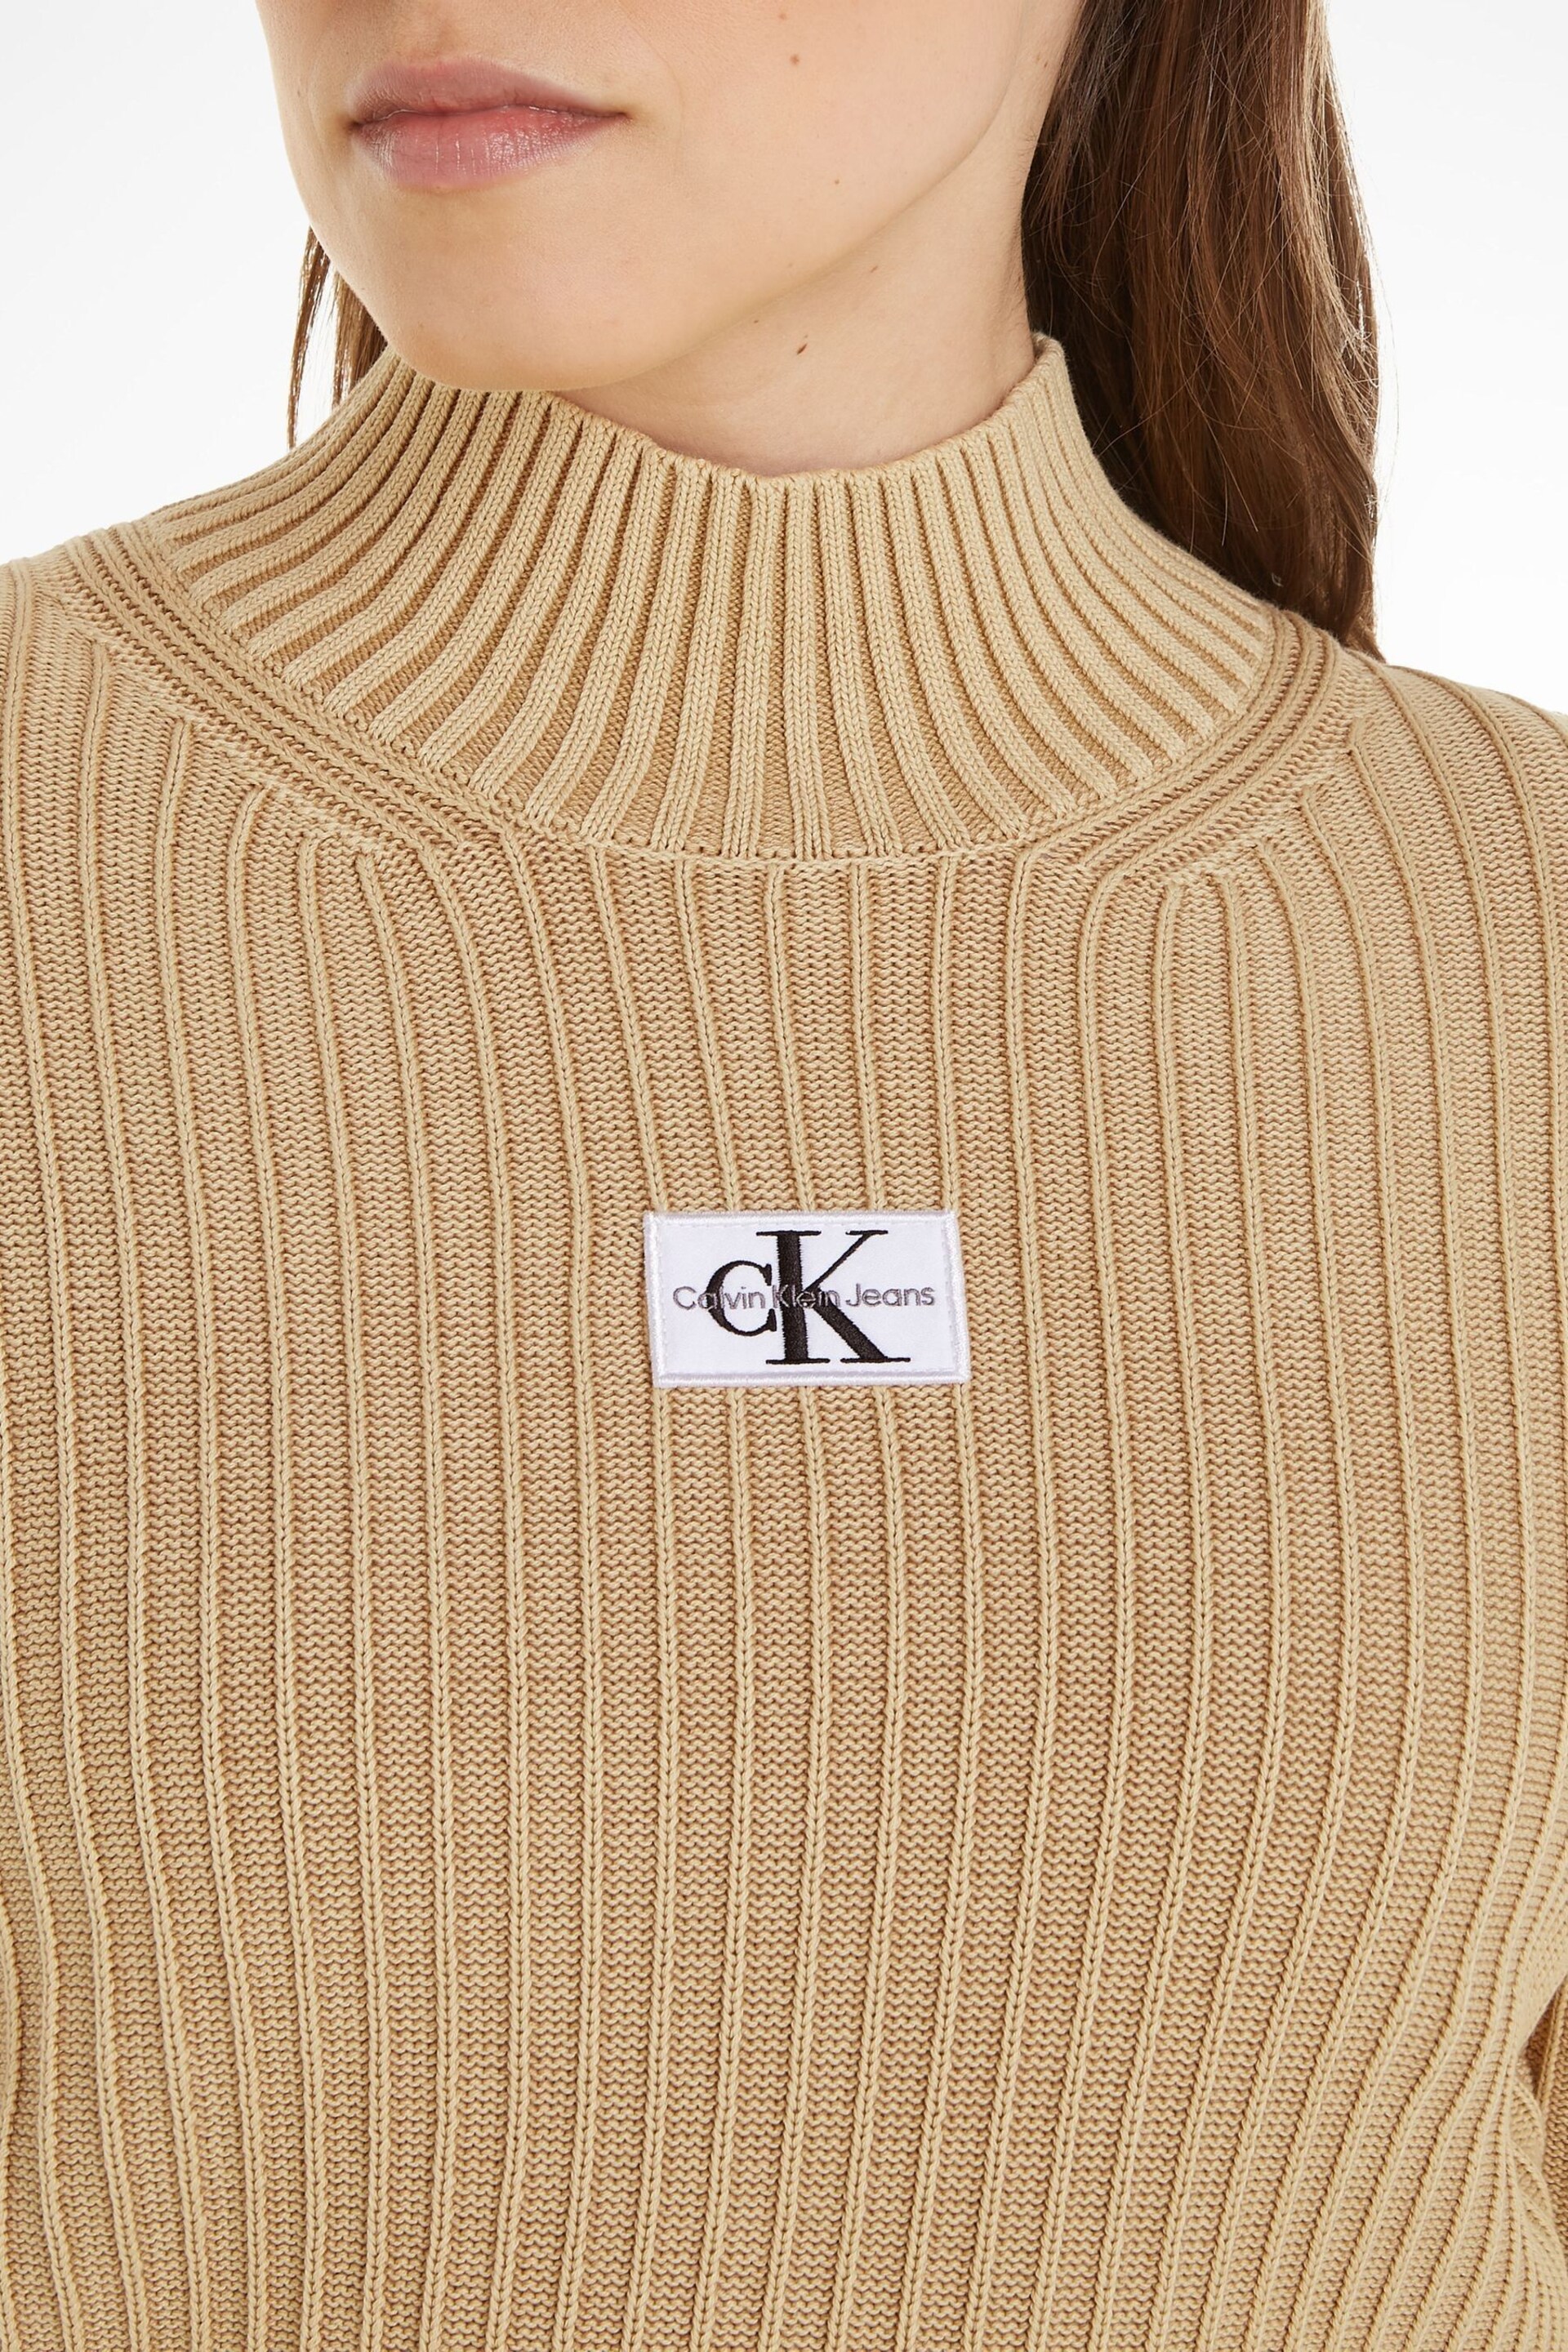 Calvin Klein Jeans Washed Monologo Natural Sweater - Image 3 of 6